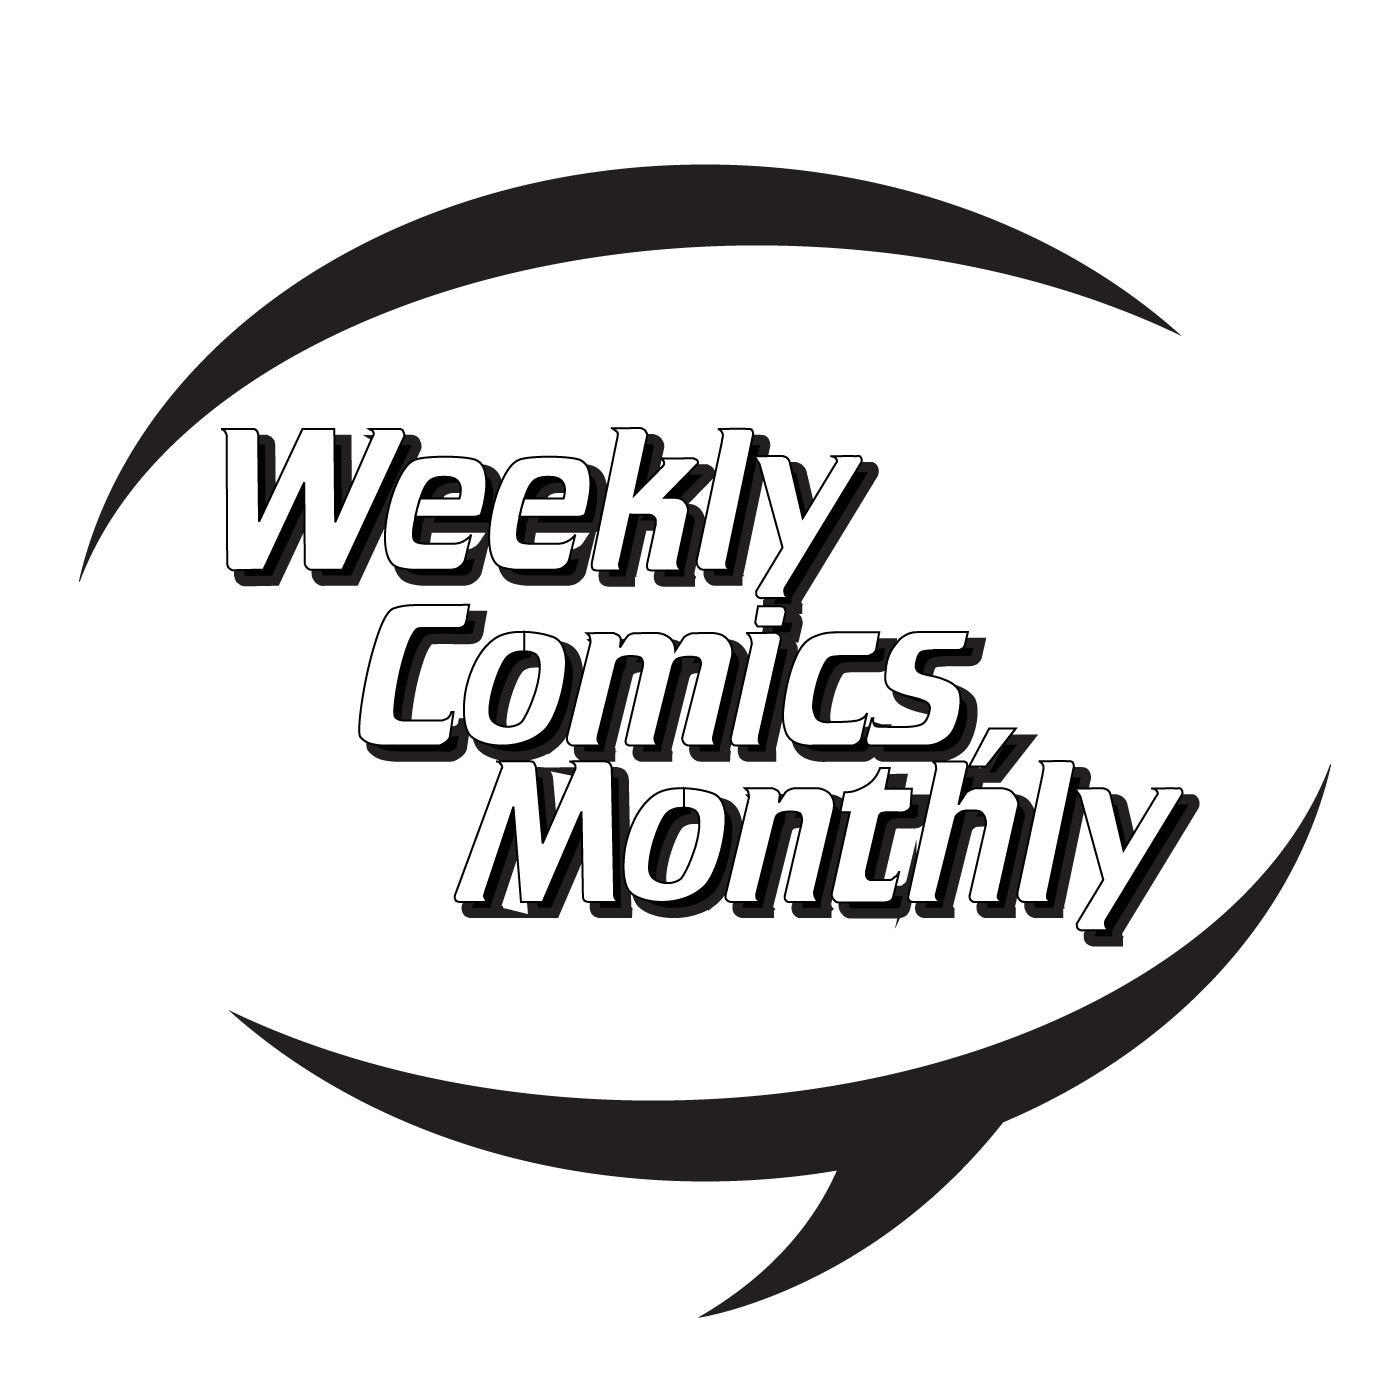 Weekly Comics, Monthly